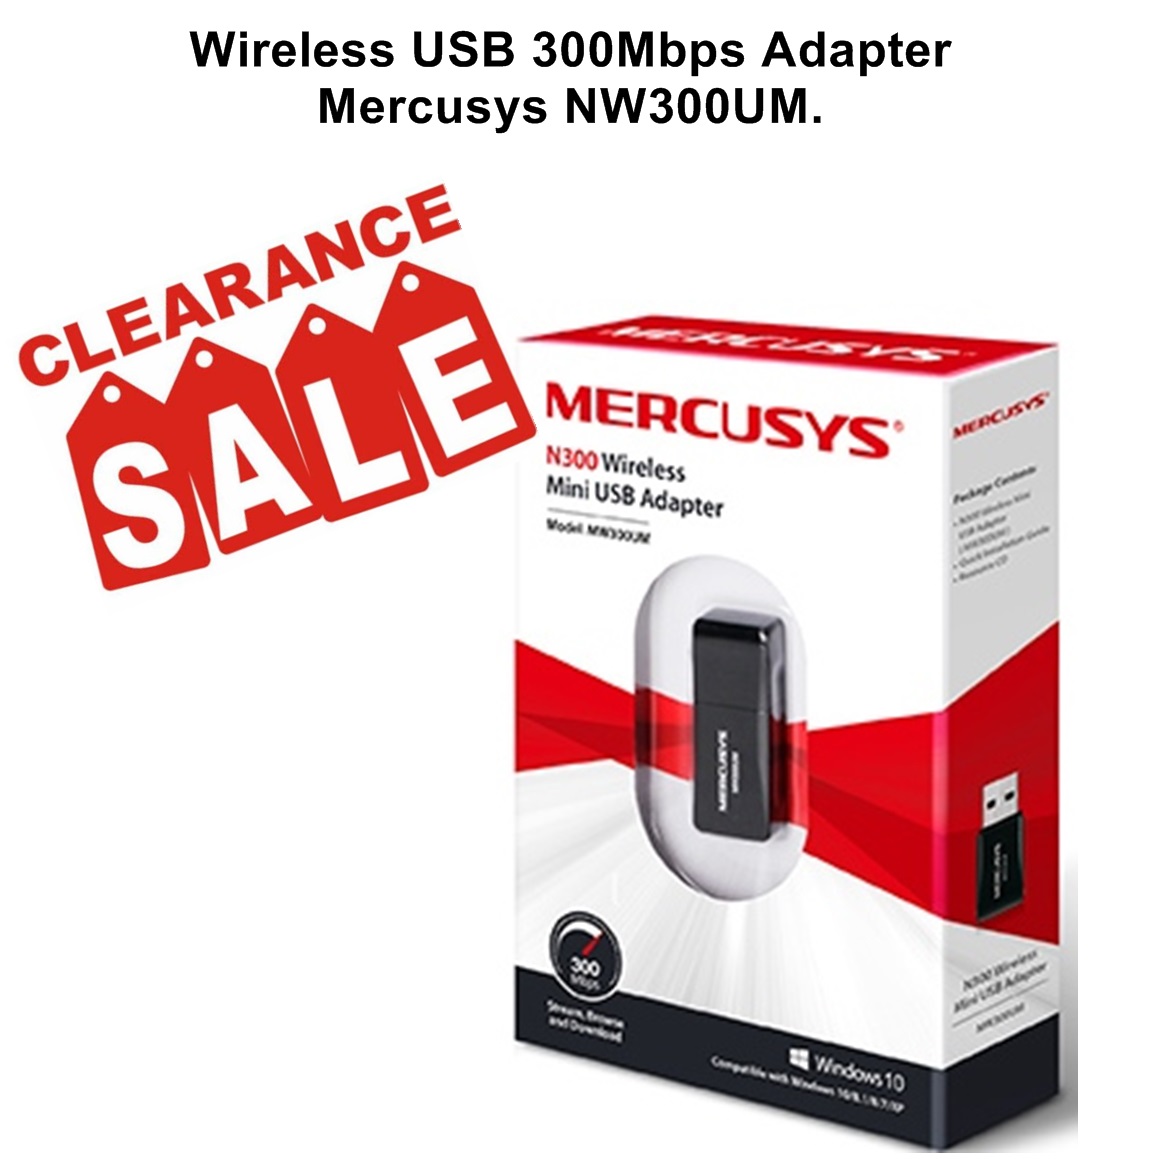 Wireless USB 300Mbps Adapter Mercusys NW300UM.